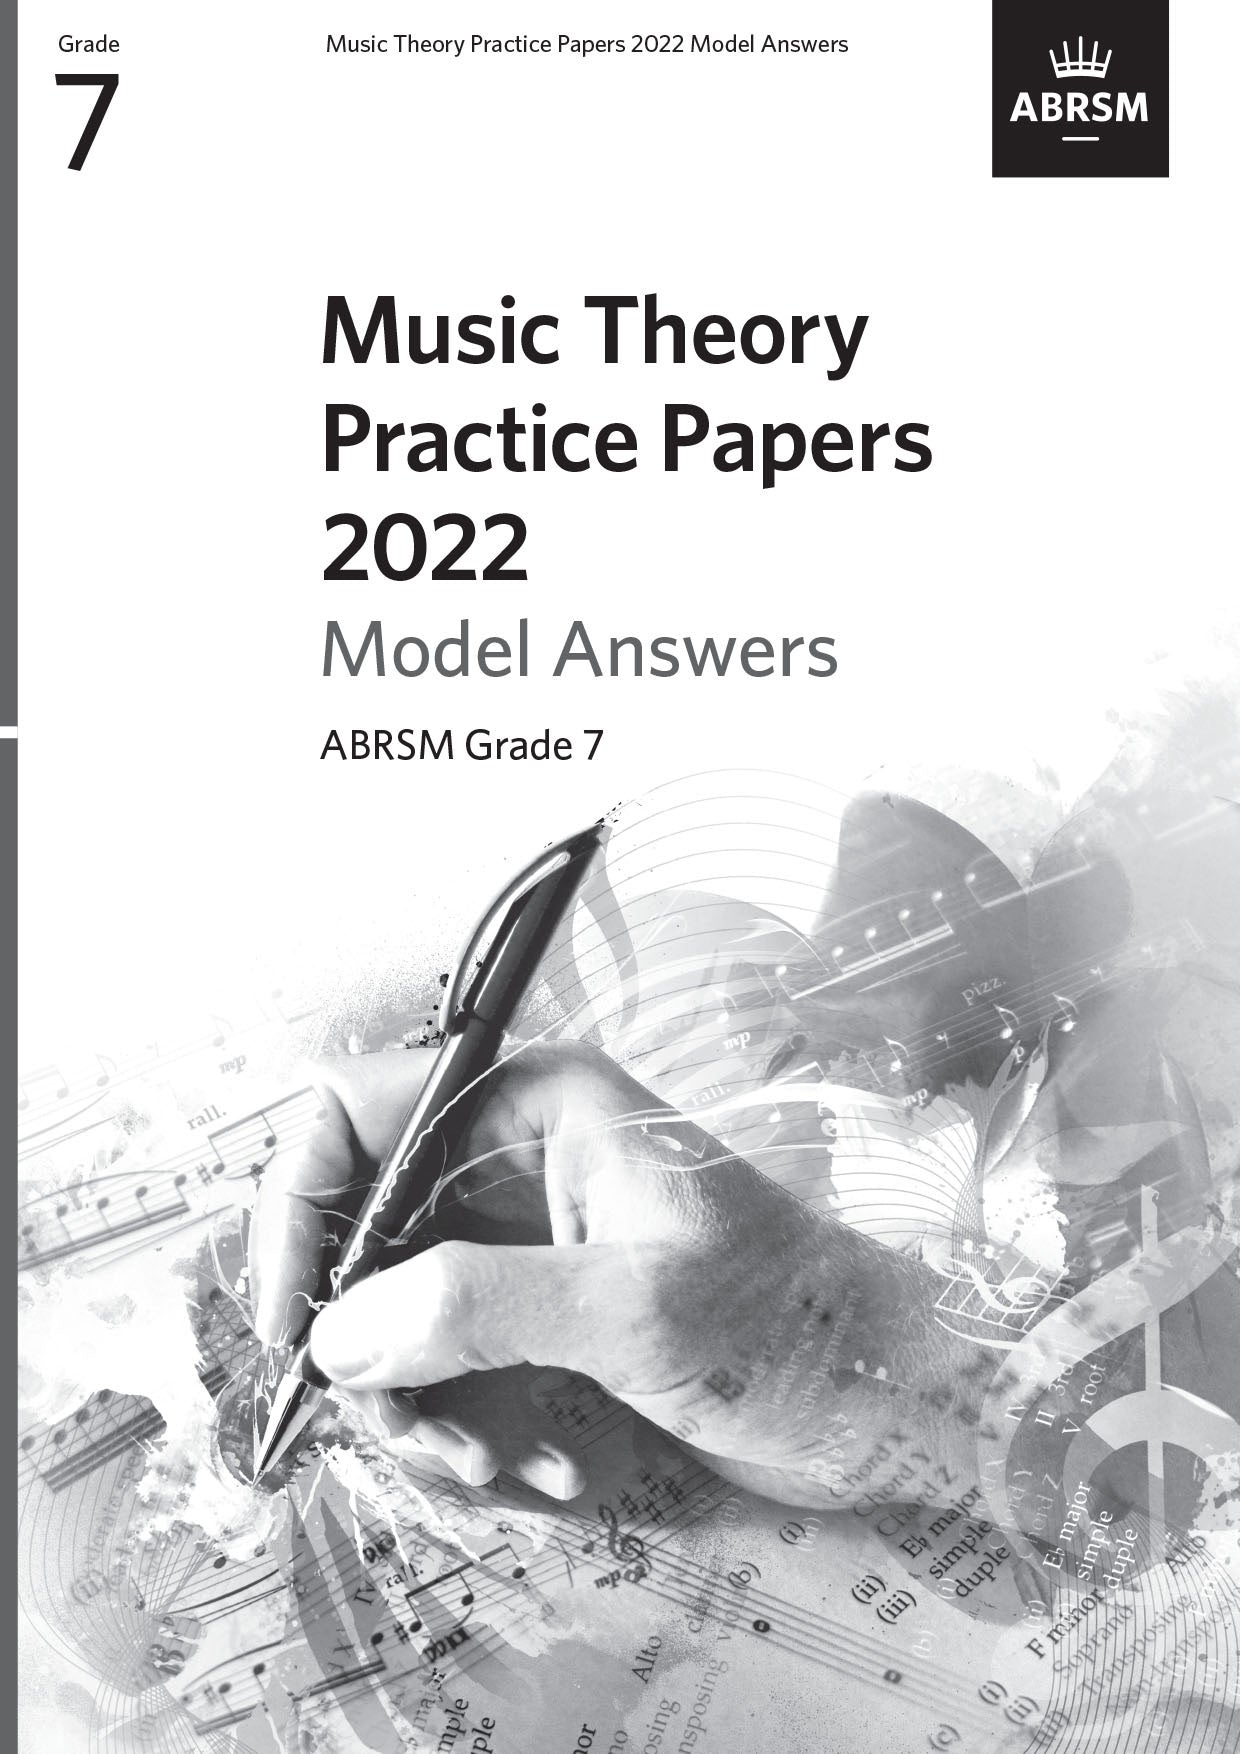 ABRSM Music Theory Practice Papers Model Answers 2022 Grade 7